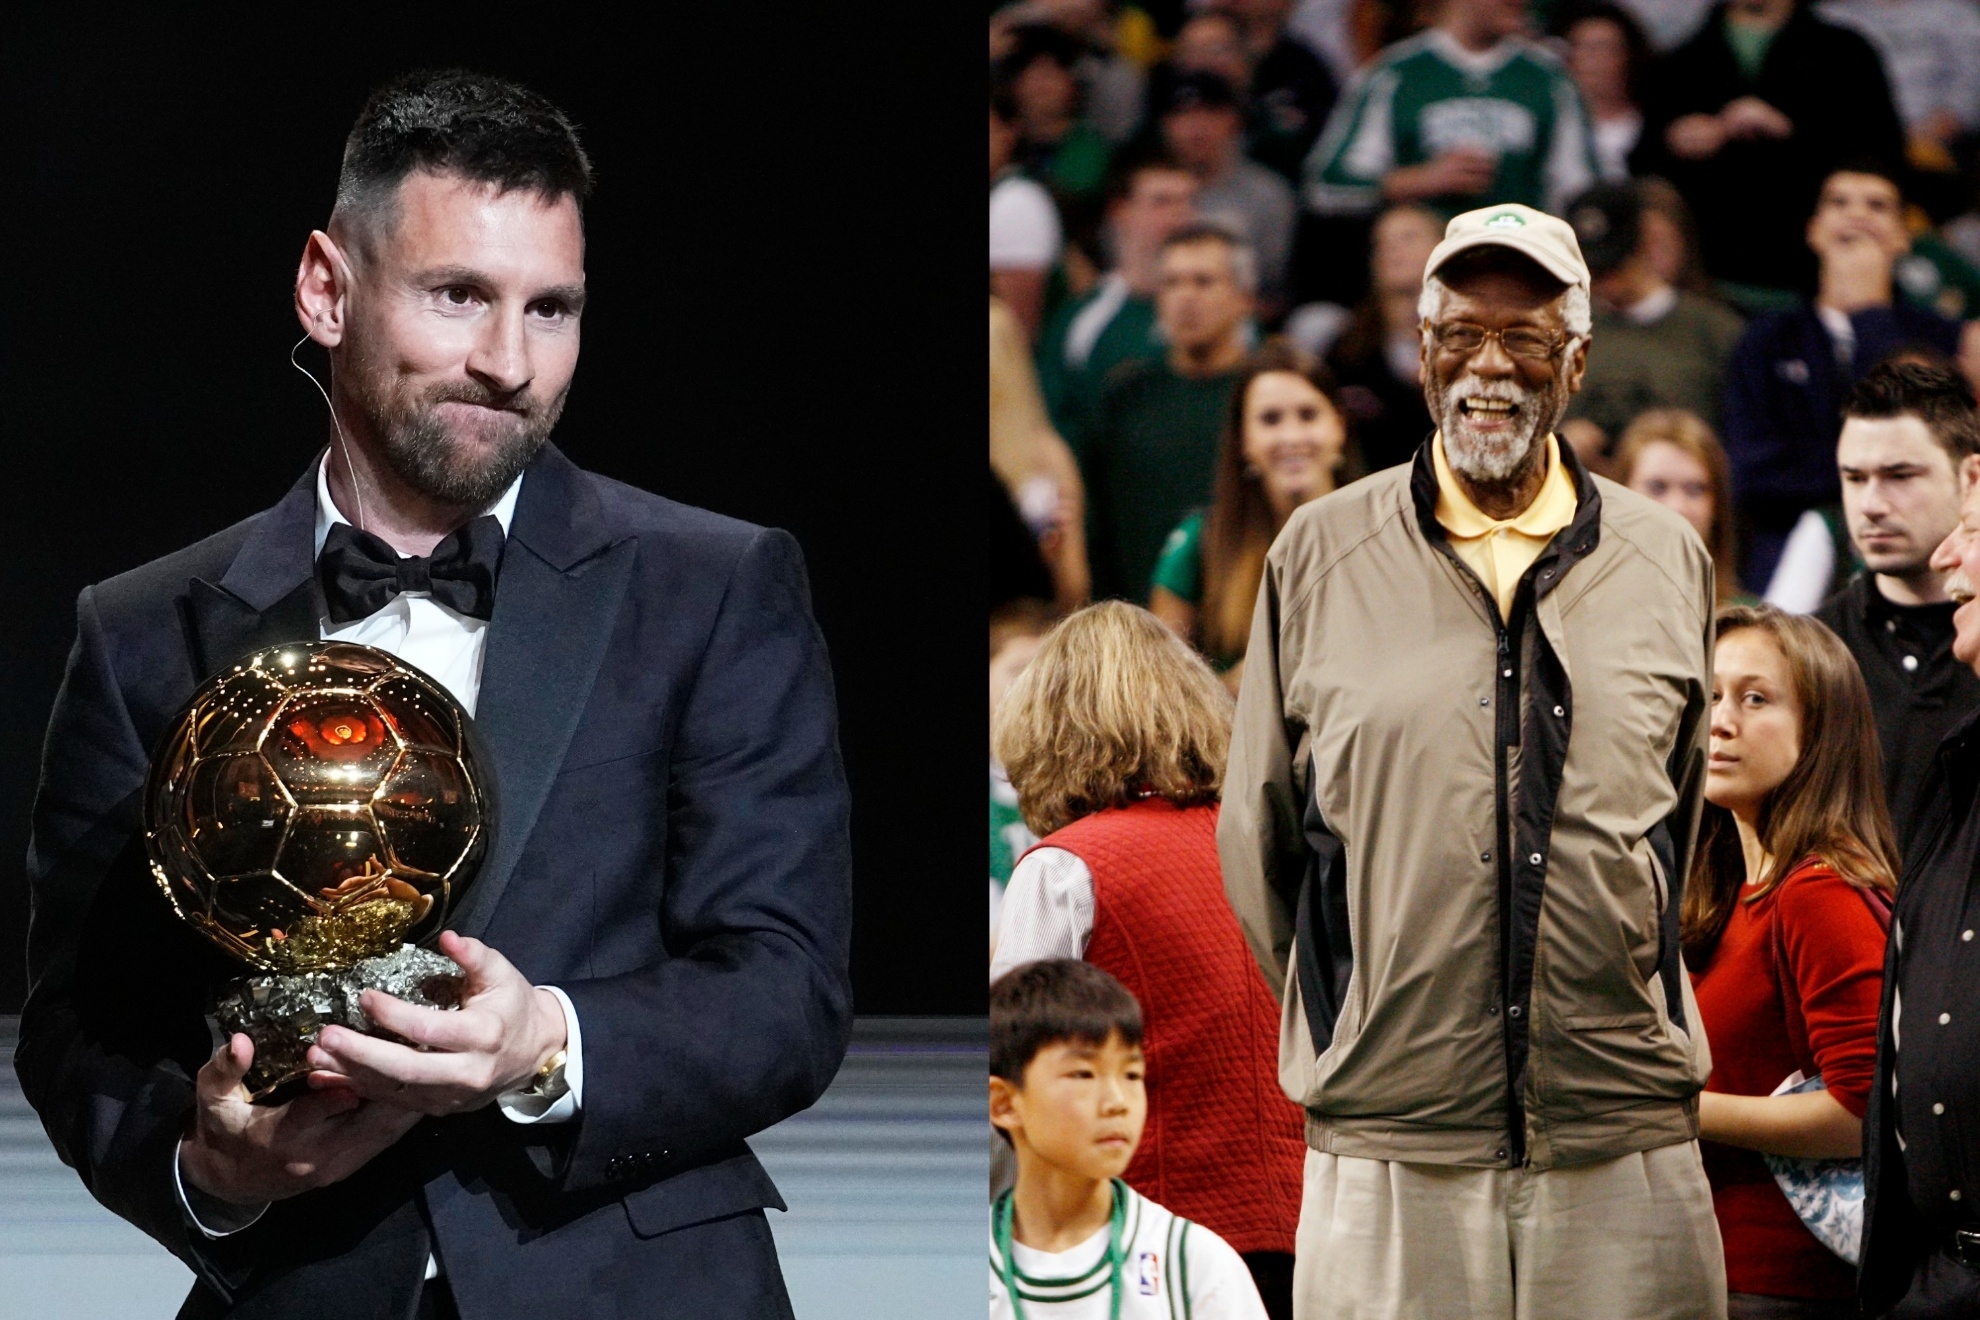 Mashup image of Lionel Messi and Bill Russell